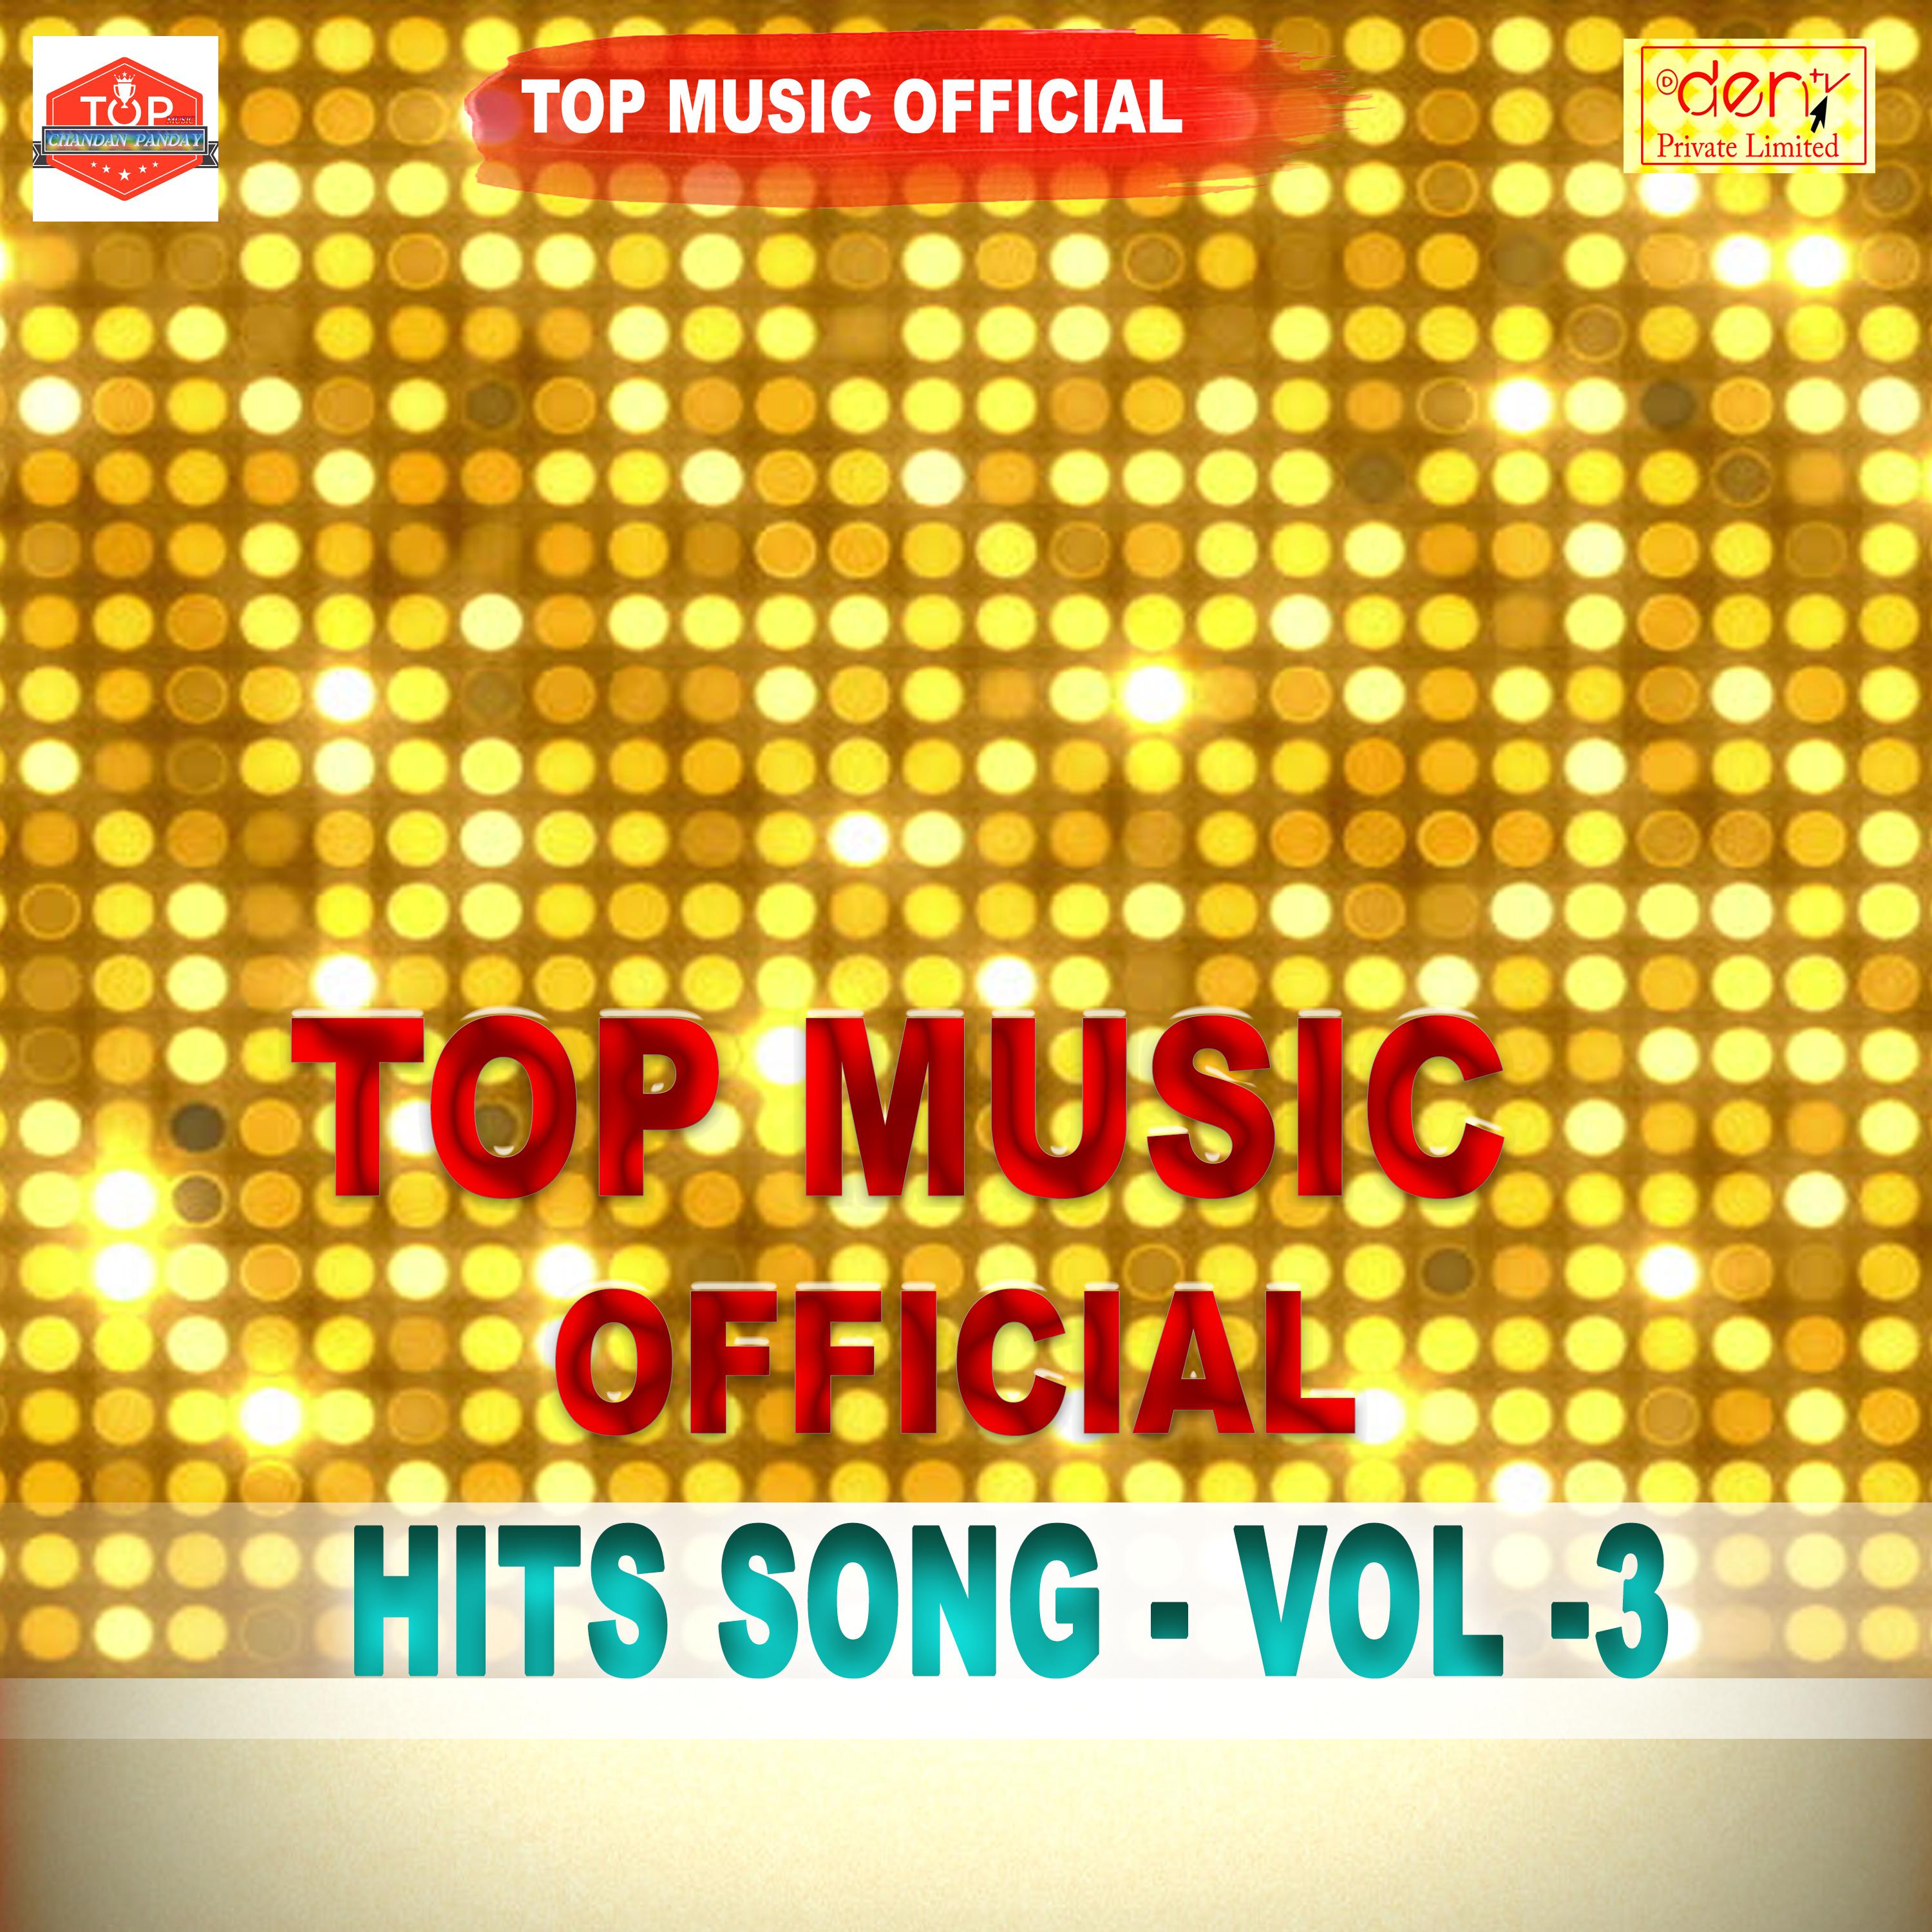 TOP MUSIC OFFICIAL Hits Vol - 3